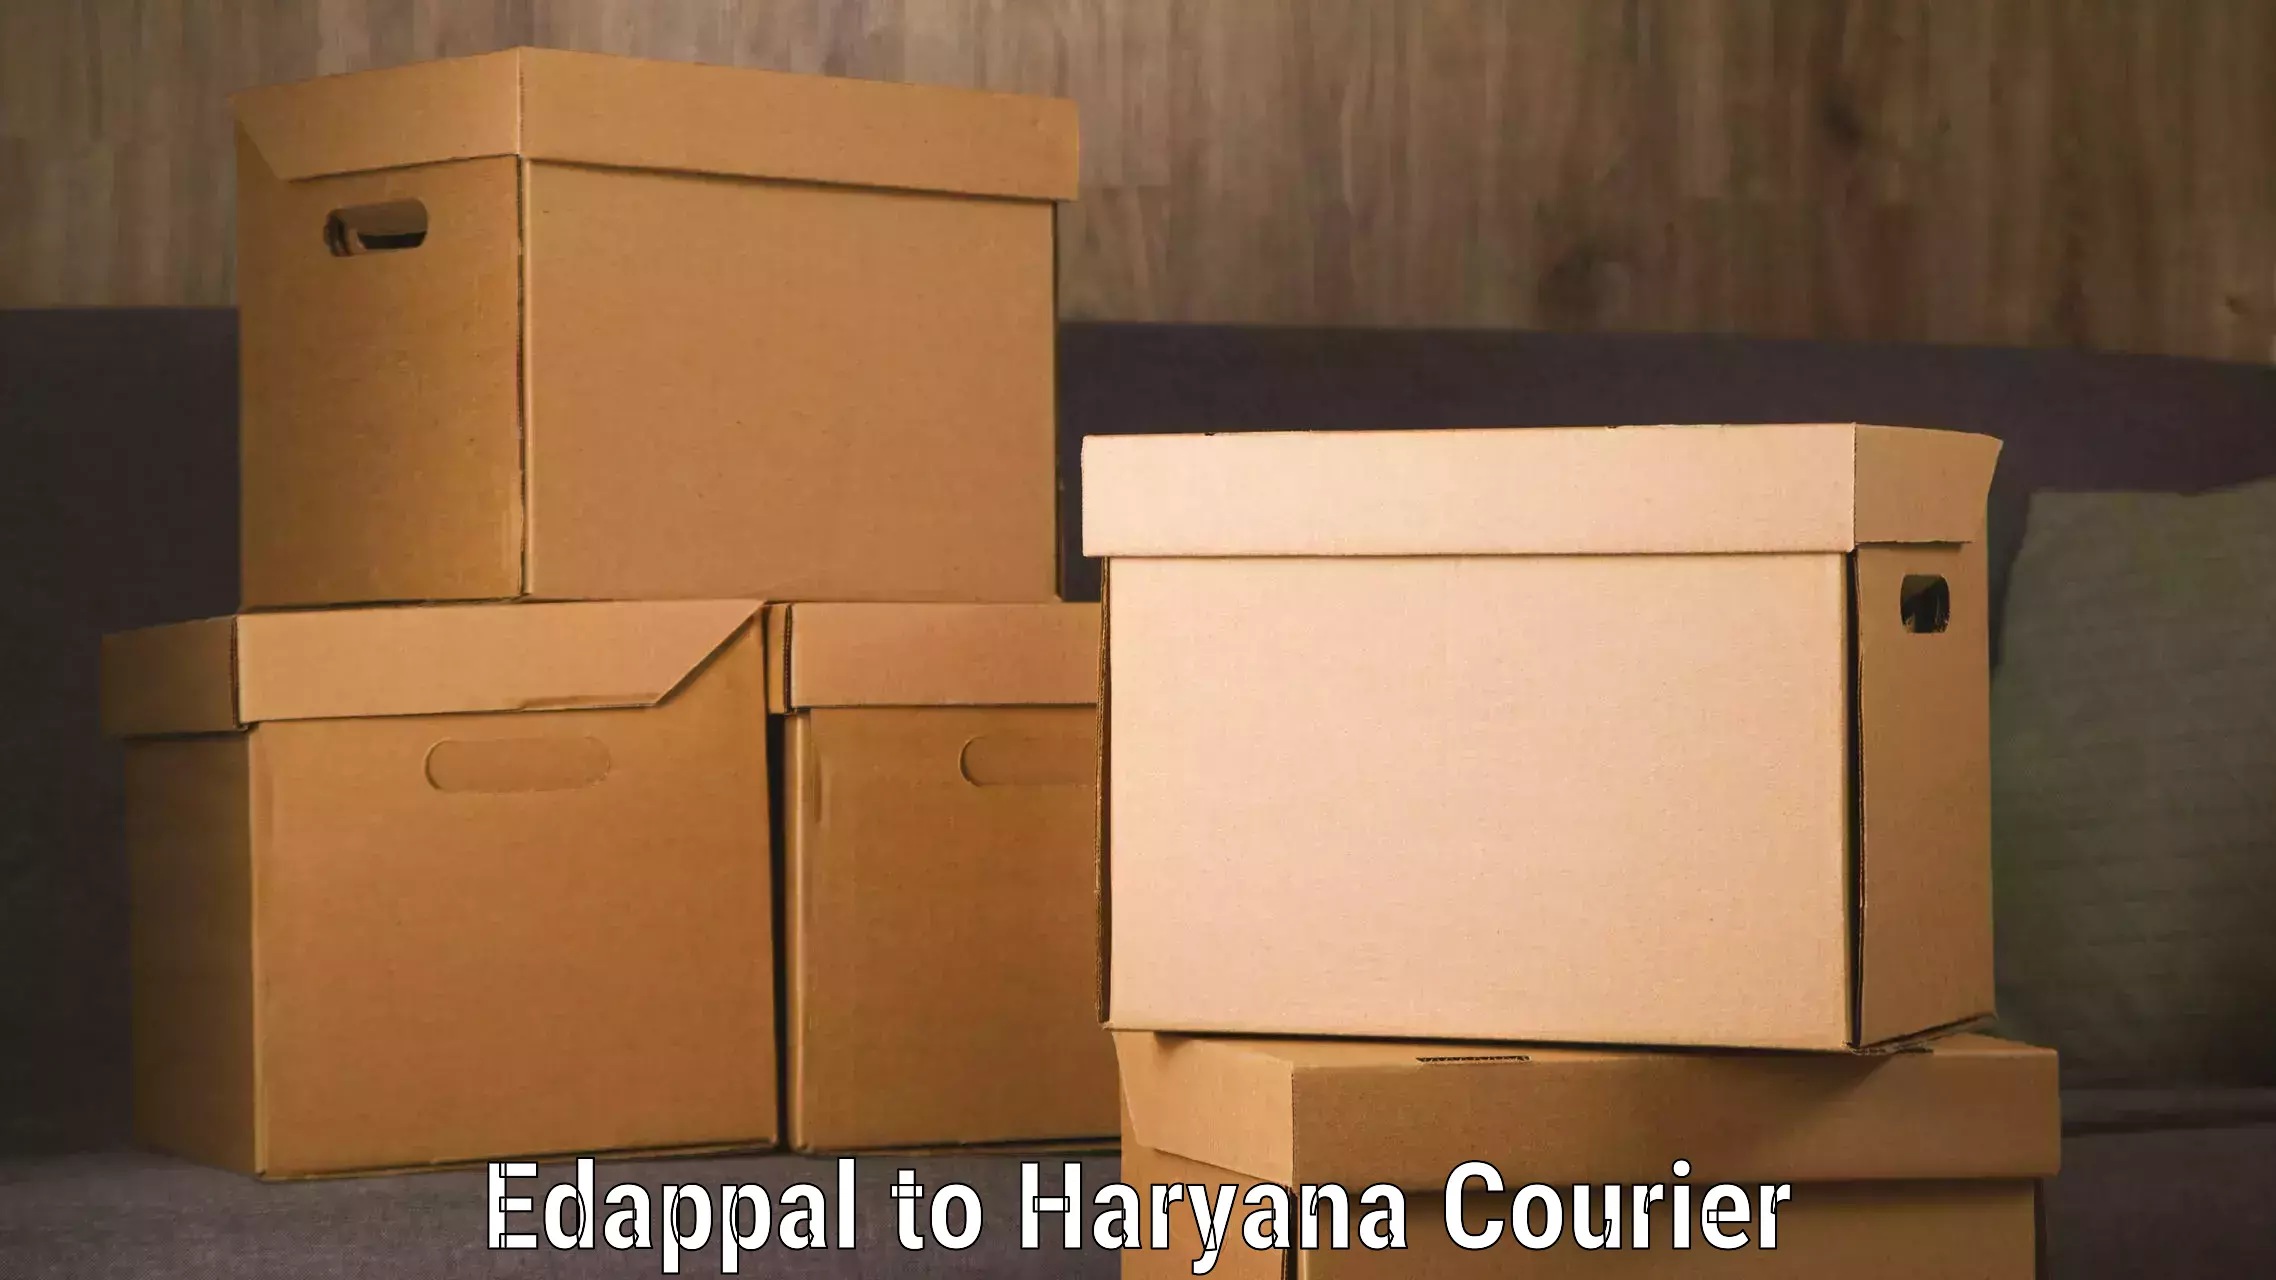 Express delivery capabilities Edappal to Ambala